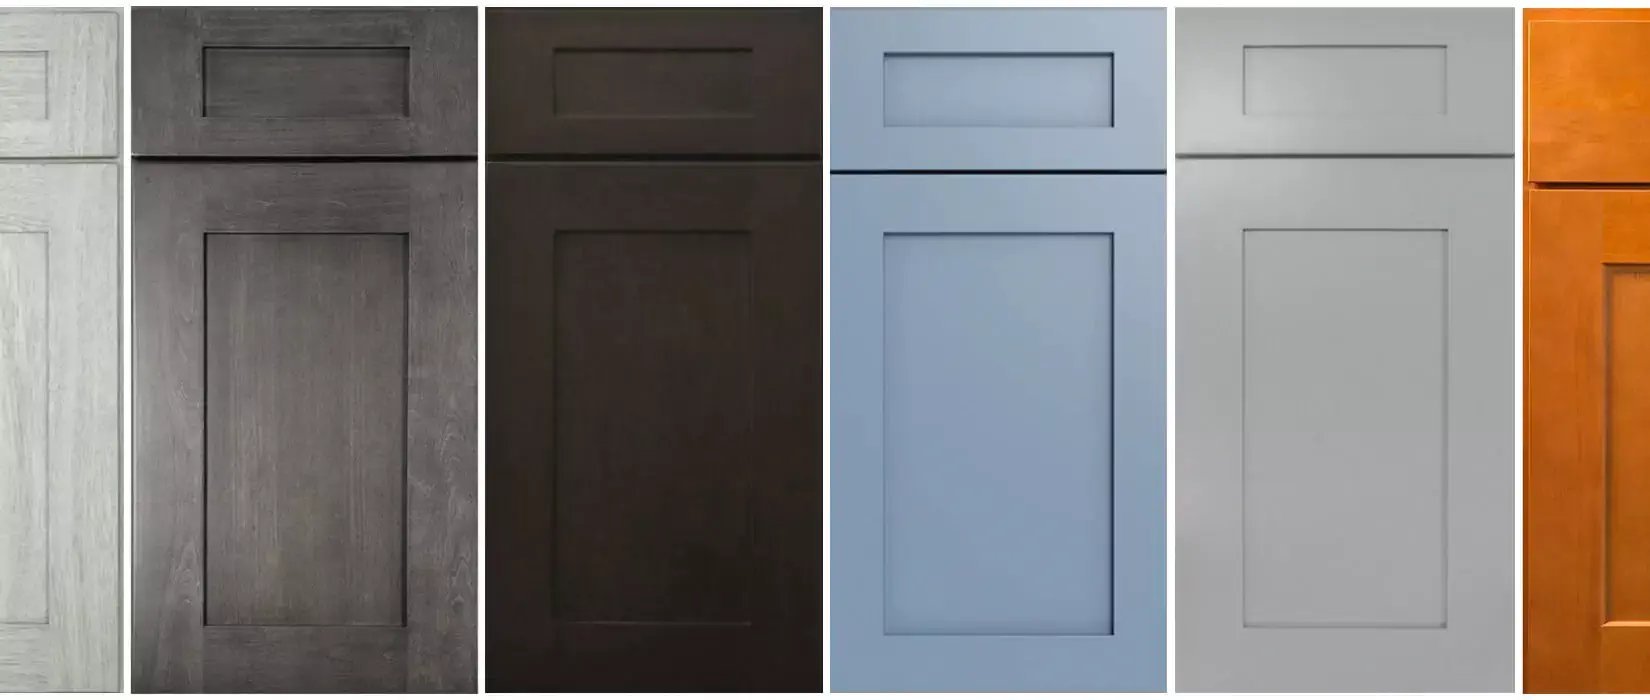 Different types of shaker style cabinets.